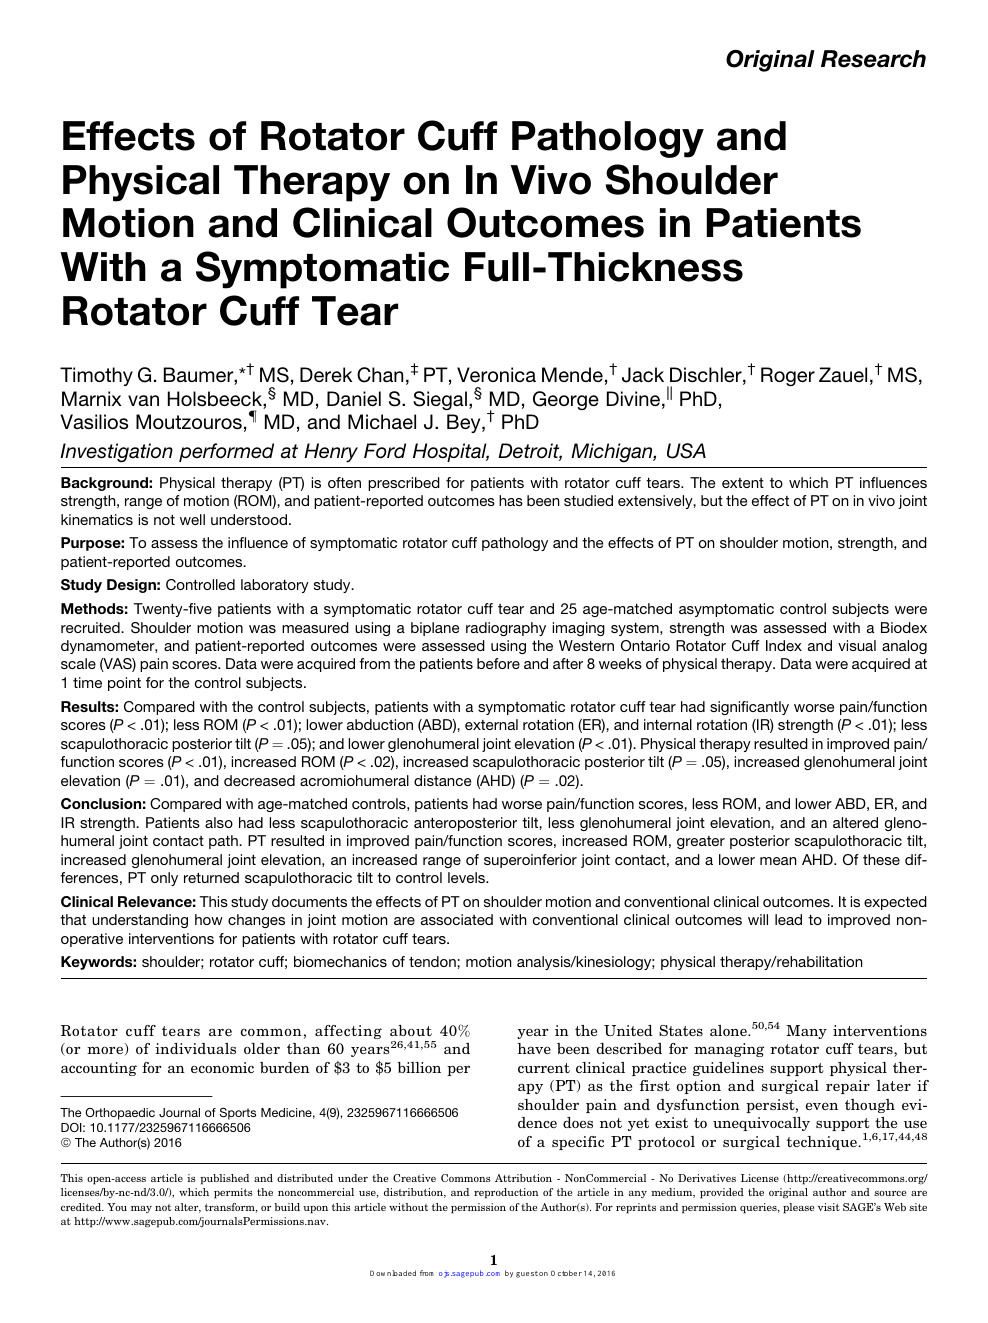 Effects Of Rotator Cuff Pathology And Physical Therapy On In Vivo Shoulder Motion And Clinical Outcomes In Patients With A Symptomatic Full Thickness Rotator Cuff Tear Topic Of Research Paper In Clinical